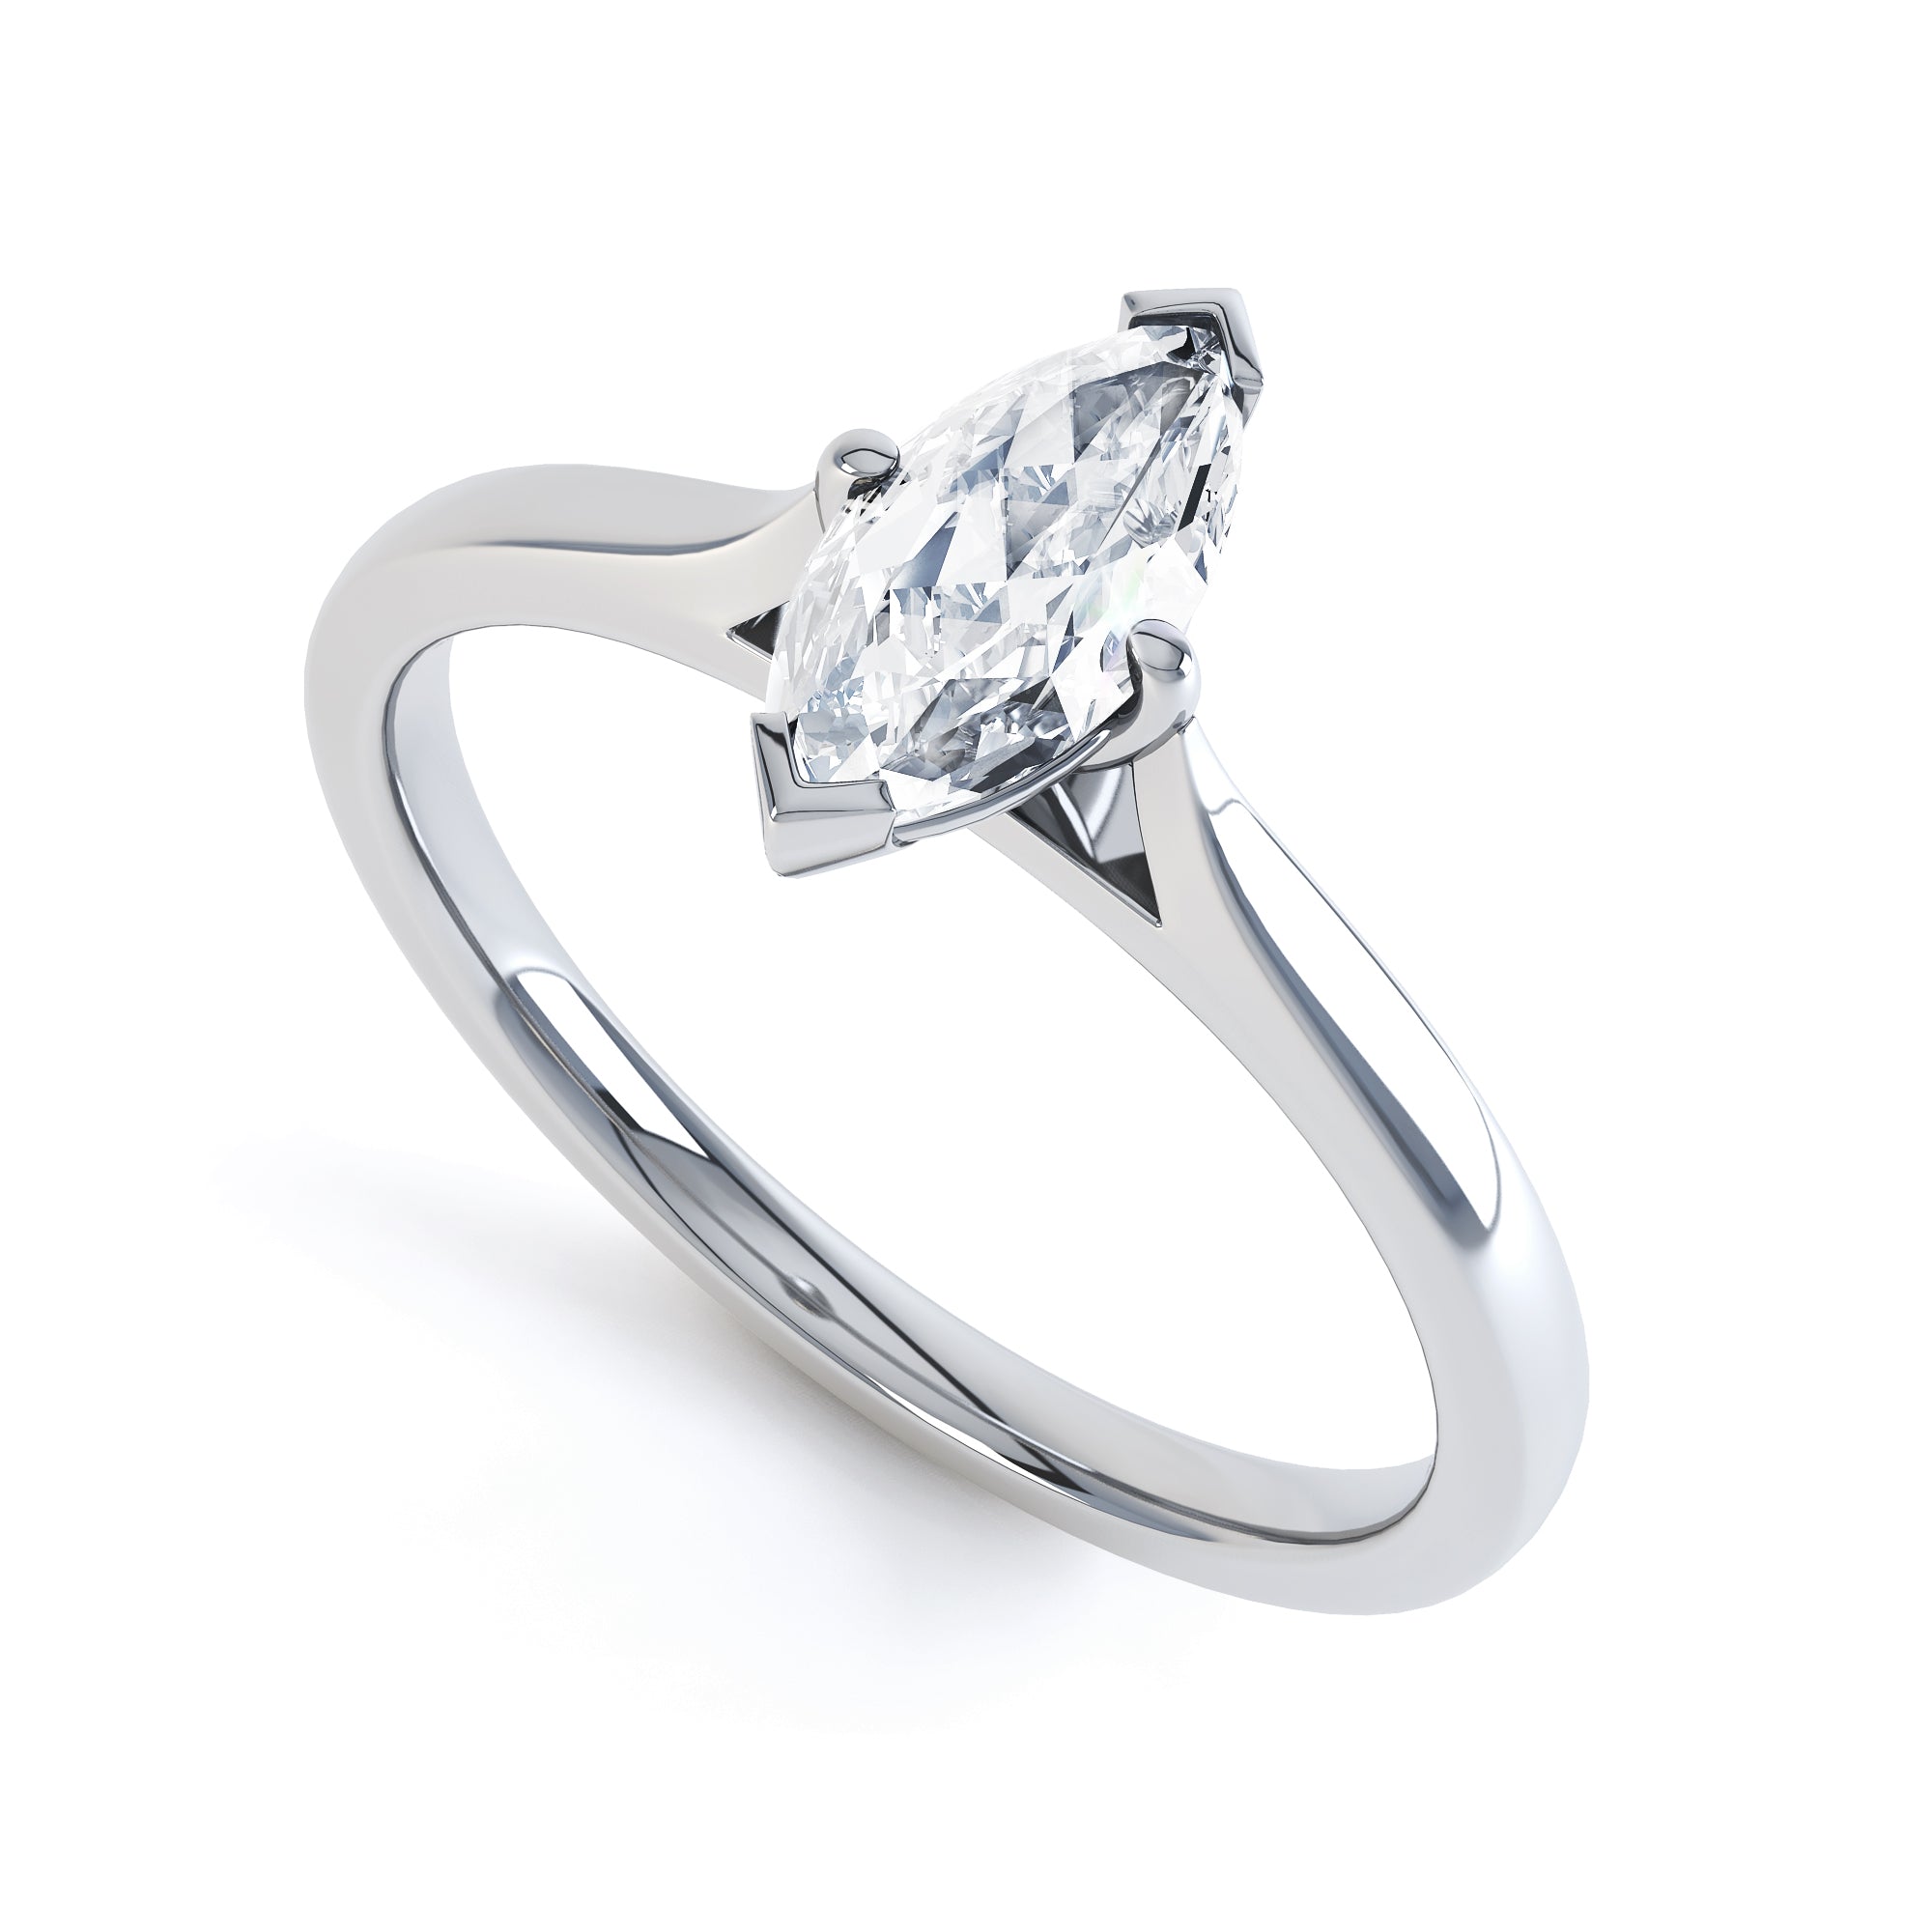 Marquise Cut Centre Stone, Two V claw, Diamond Engagement Ring with Knife Edge Splite Shoulders